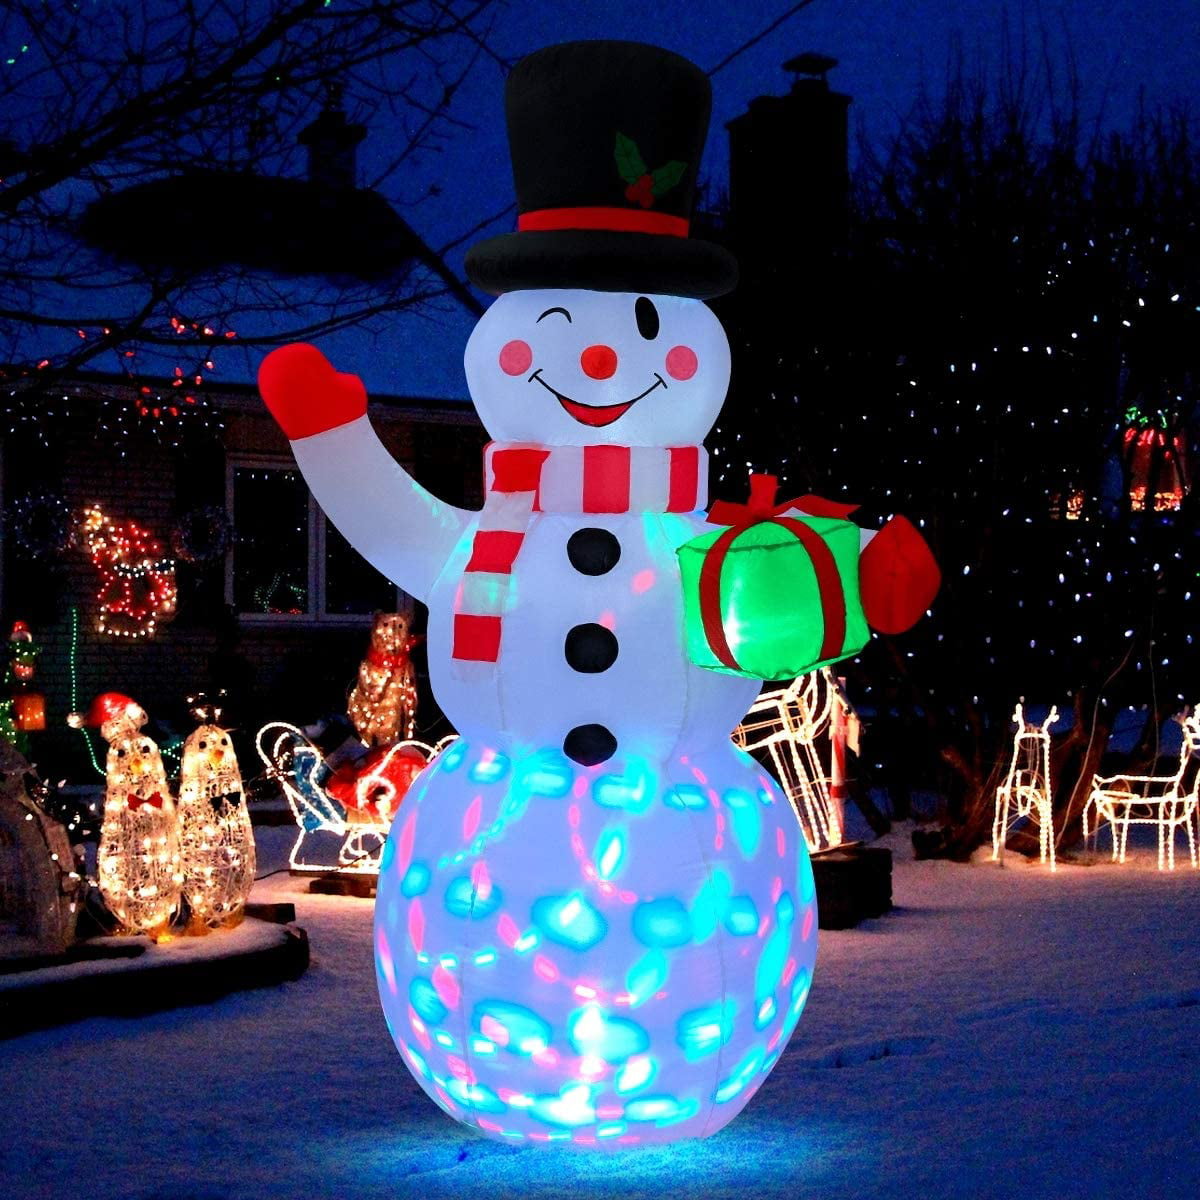 Maoyue Inflatables 5ft, Light Up Snowman Yard Decorations